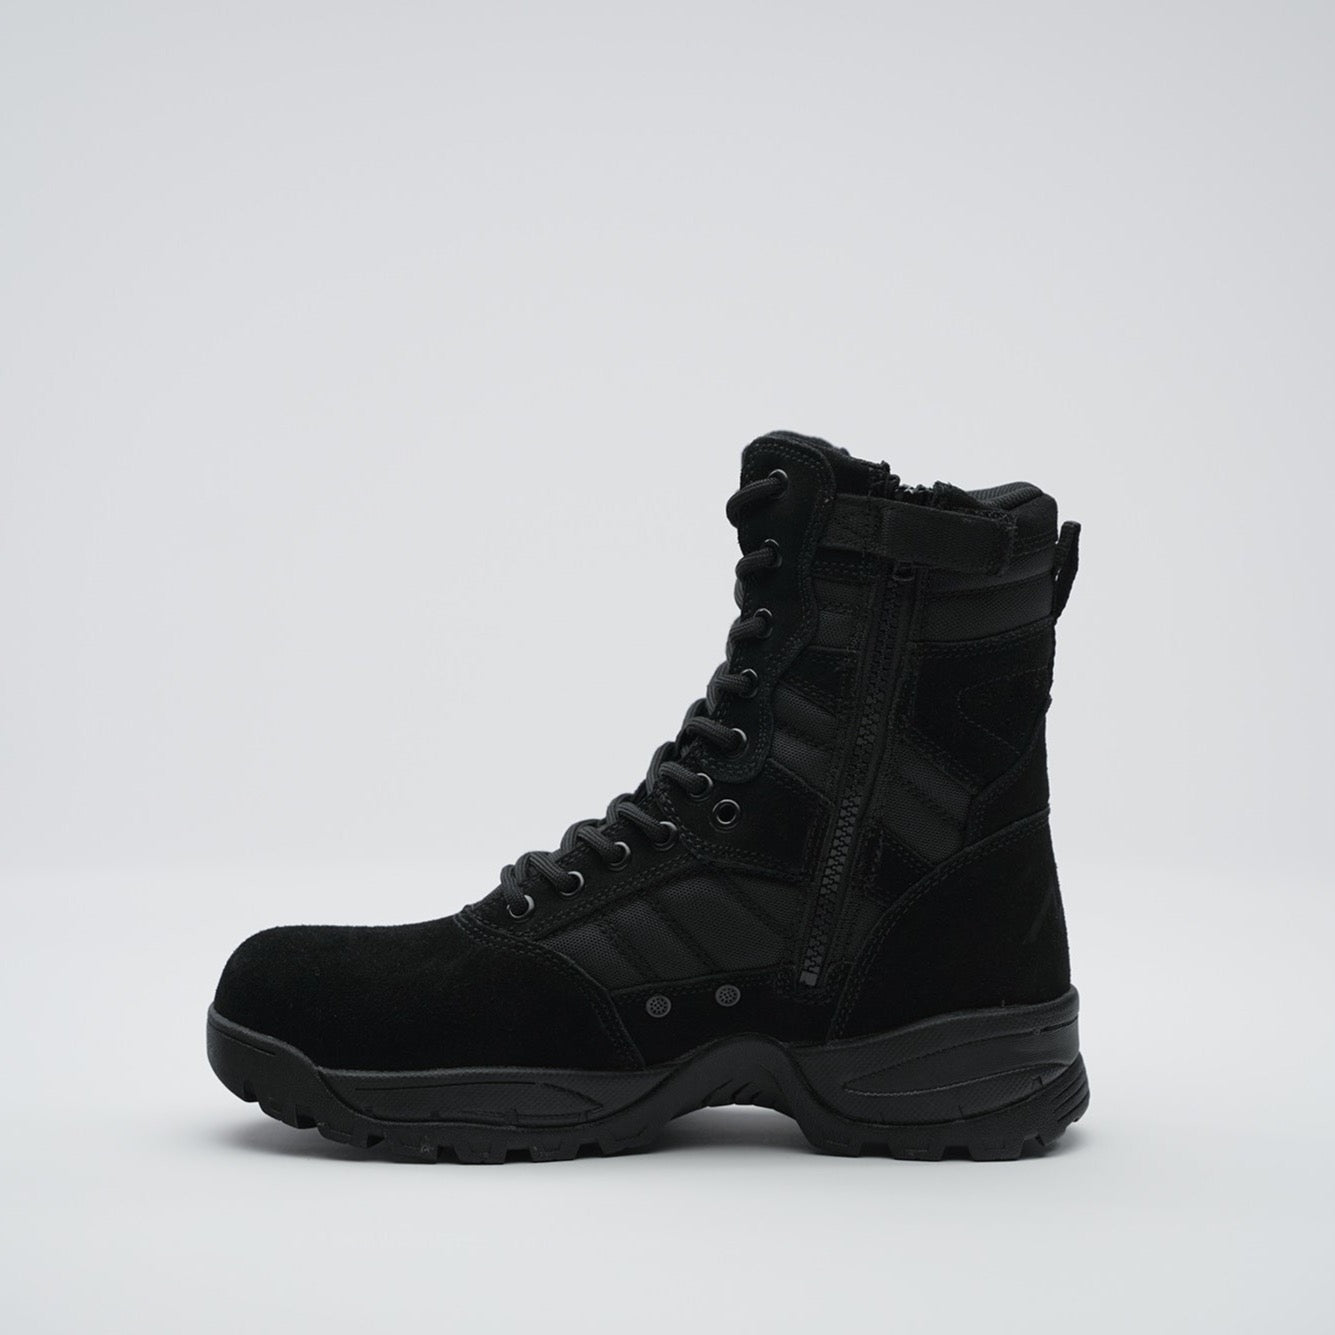 protector 9" military boot showing side zip and vents